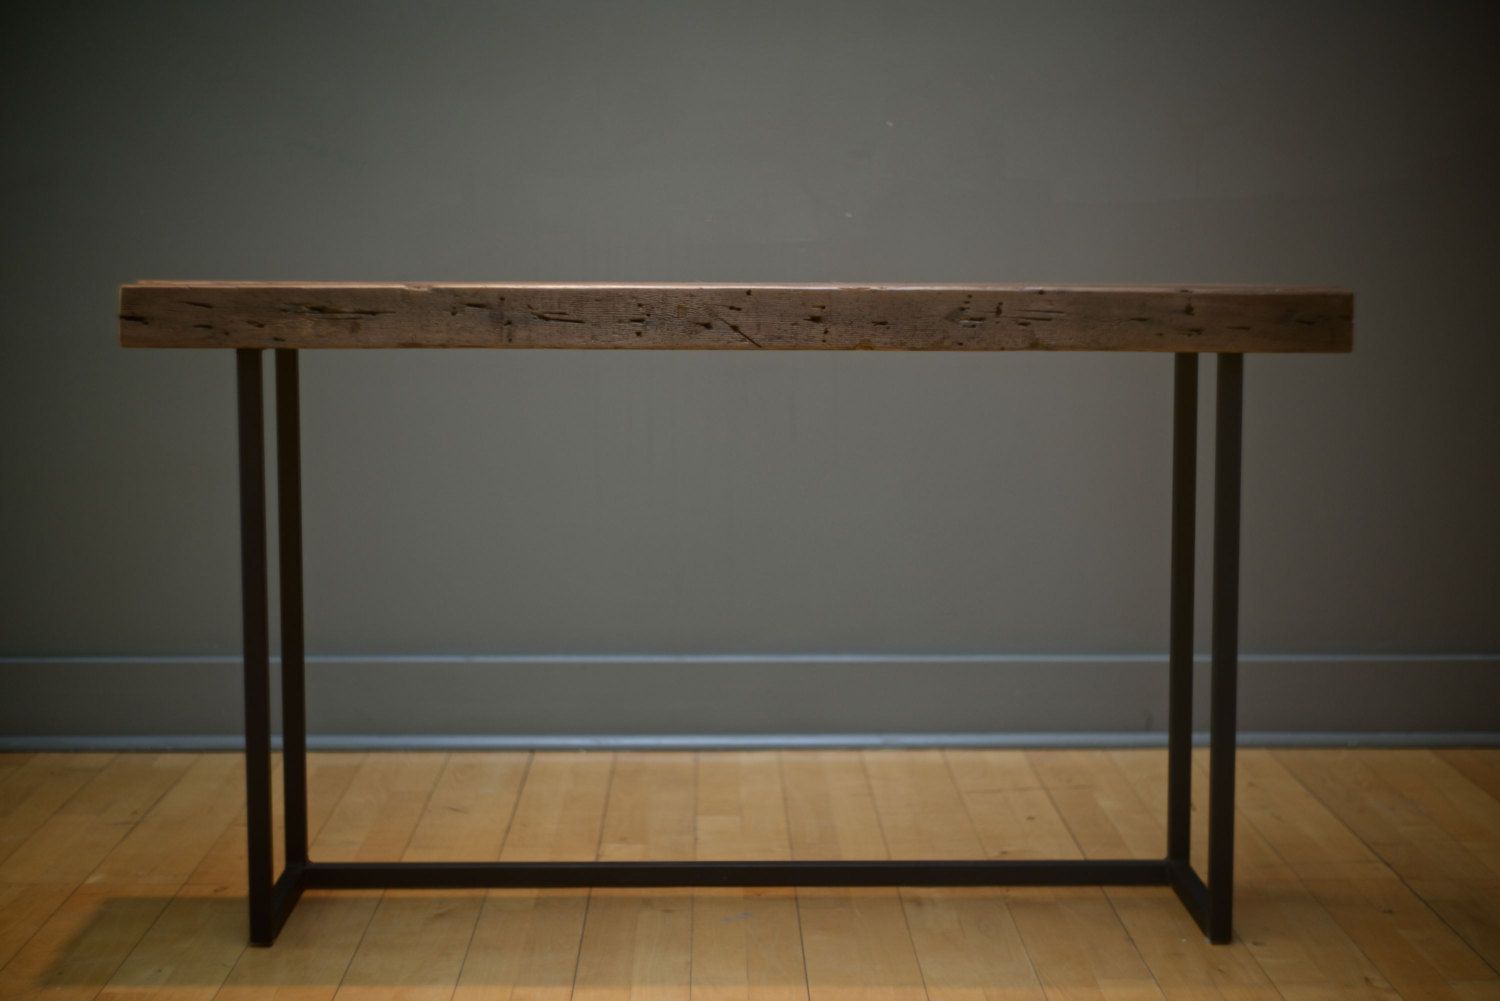 Skinny Sofa Tables For An Aesthetic Purpose – Homesfeed Within Oak Wood And Metal Legs Console Tables (View 13 of 20)